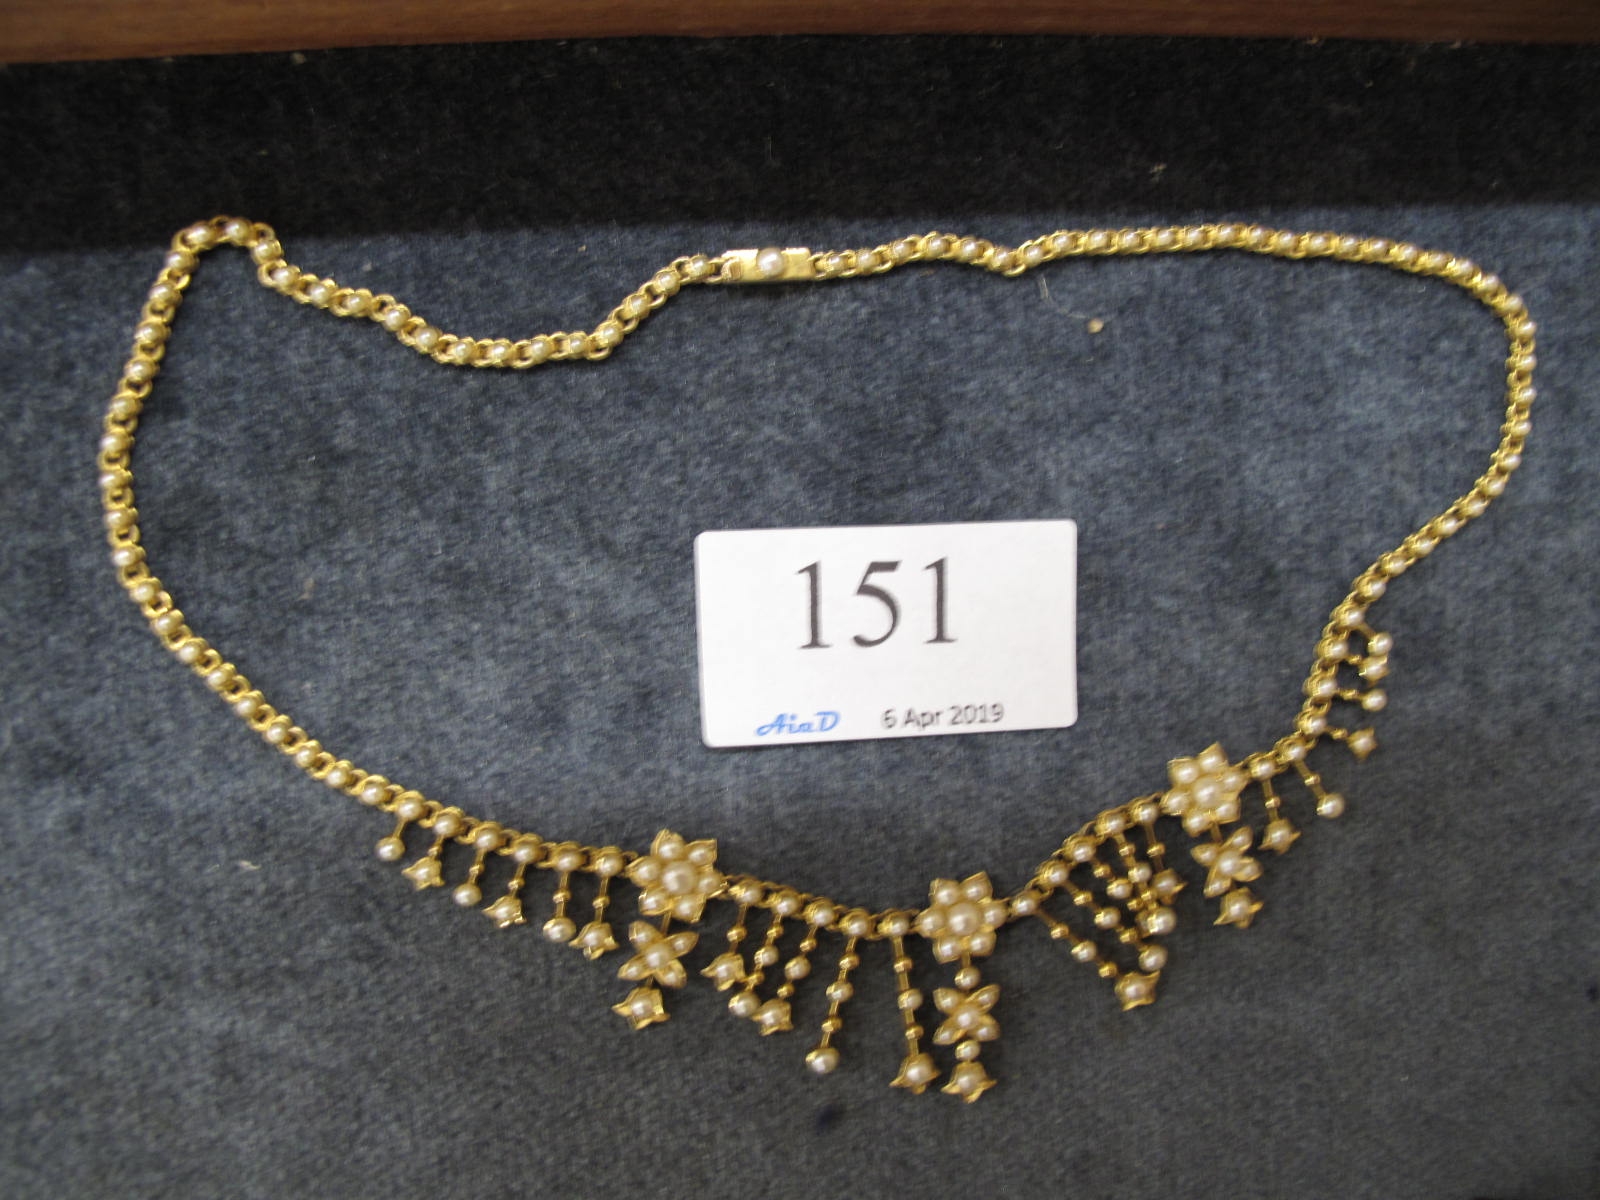 Lot 151 - Gold and seed pearl necklace - Sold for £300